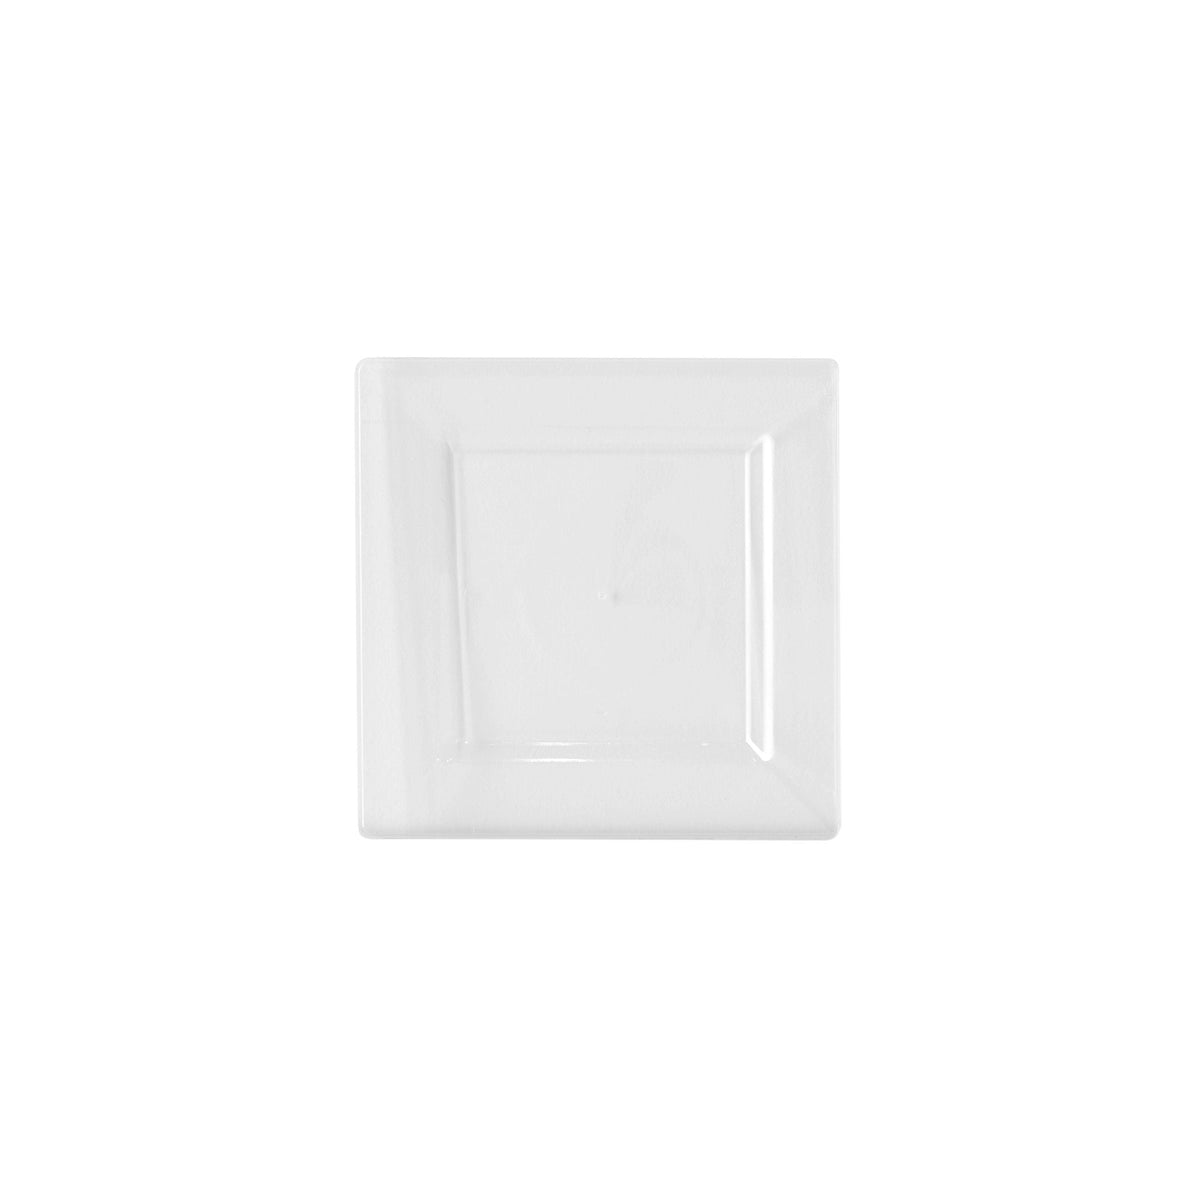 MADISON IMPORTS Disposable-Plasticware Small Square Clear Plastic Plates, 4.5 Inches, 25 Count 775310470071